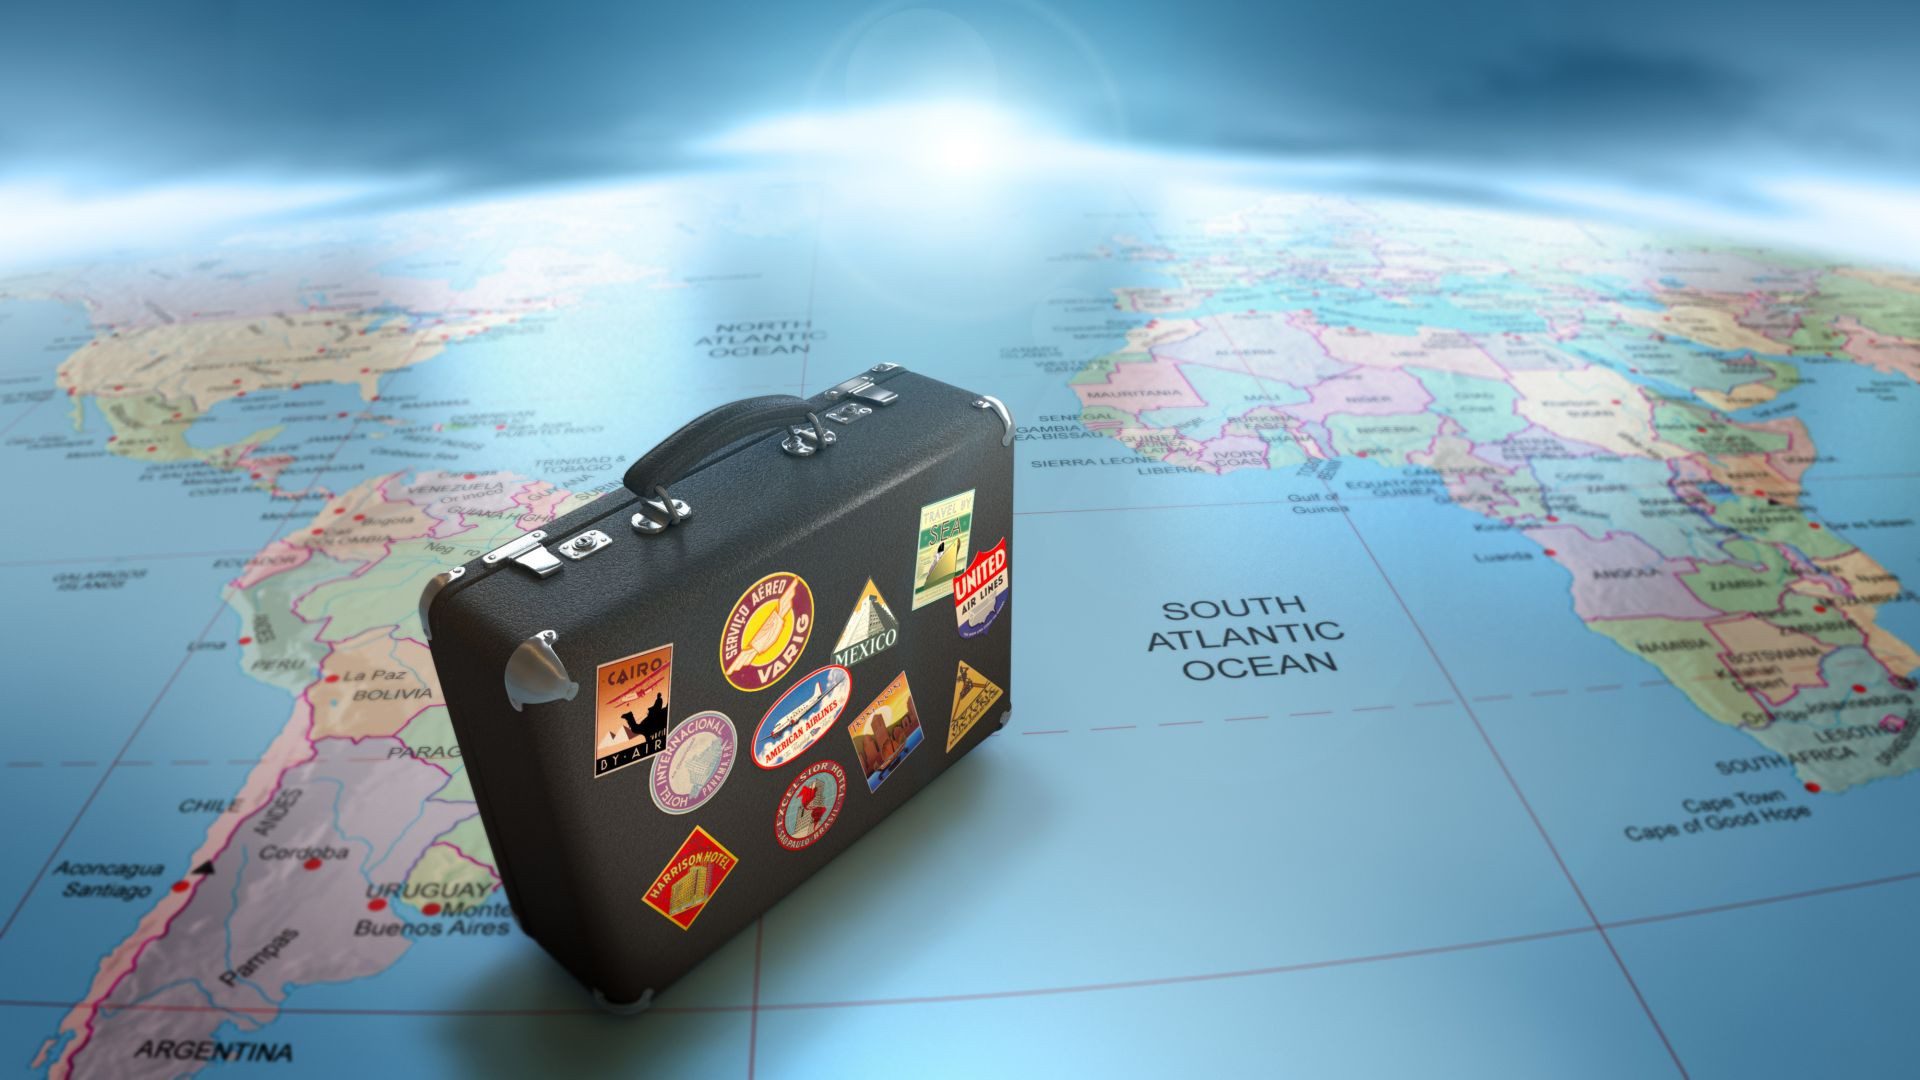 Protect your vacation plans with travel insurance